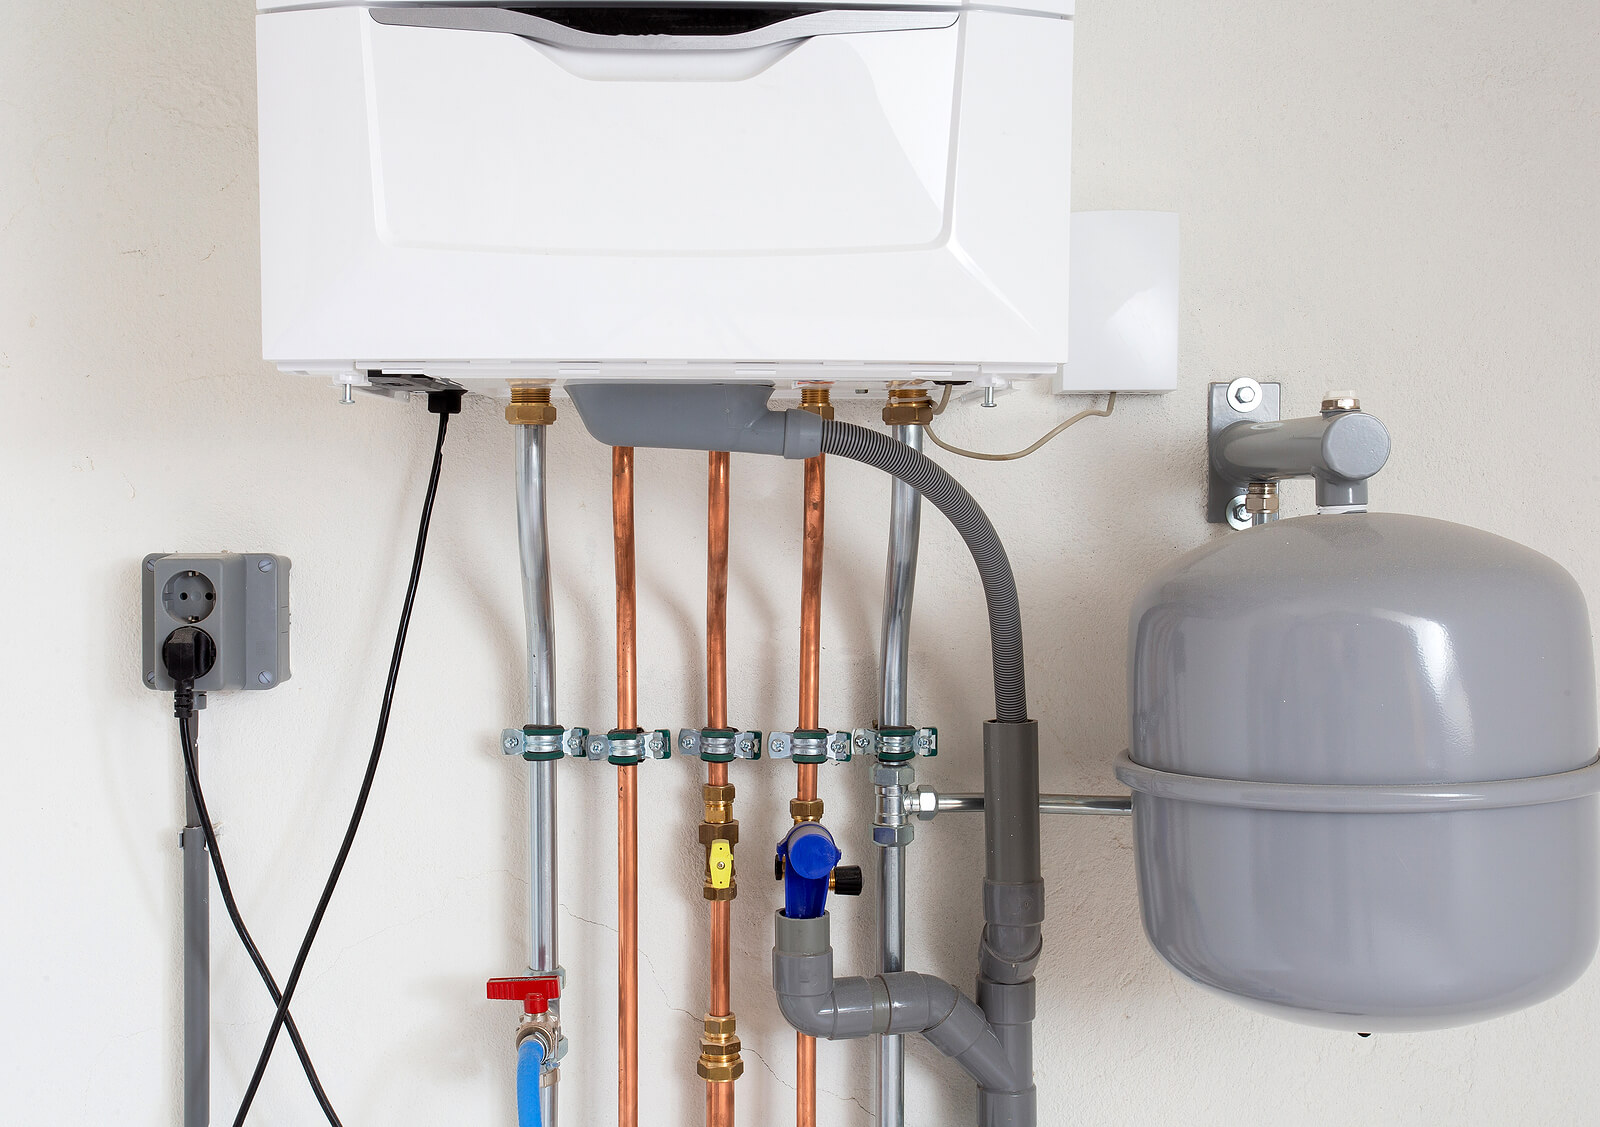 How to Clean a Hot Water Heater Burner